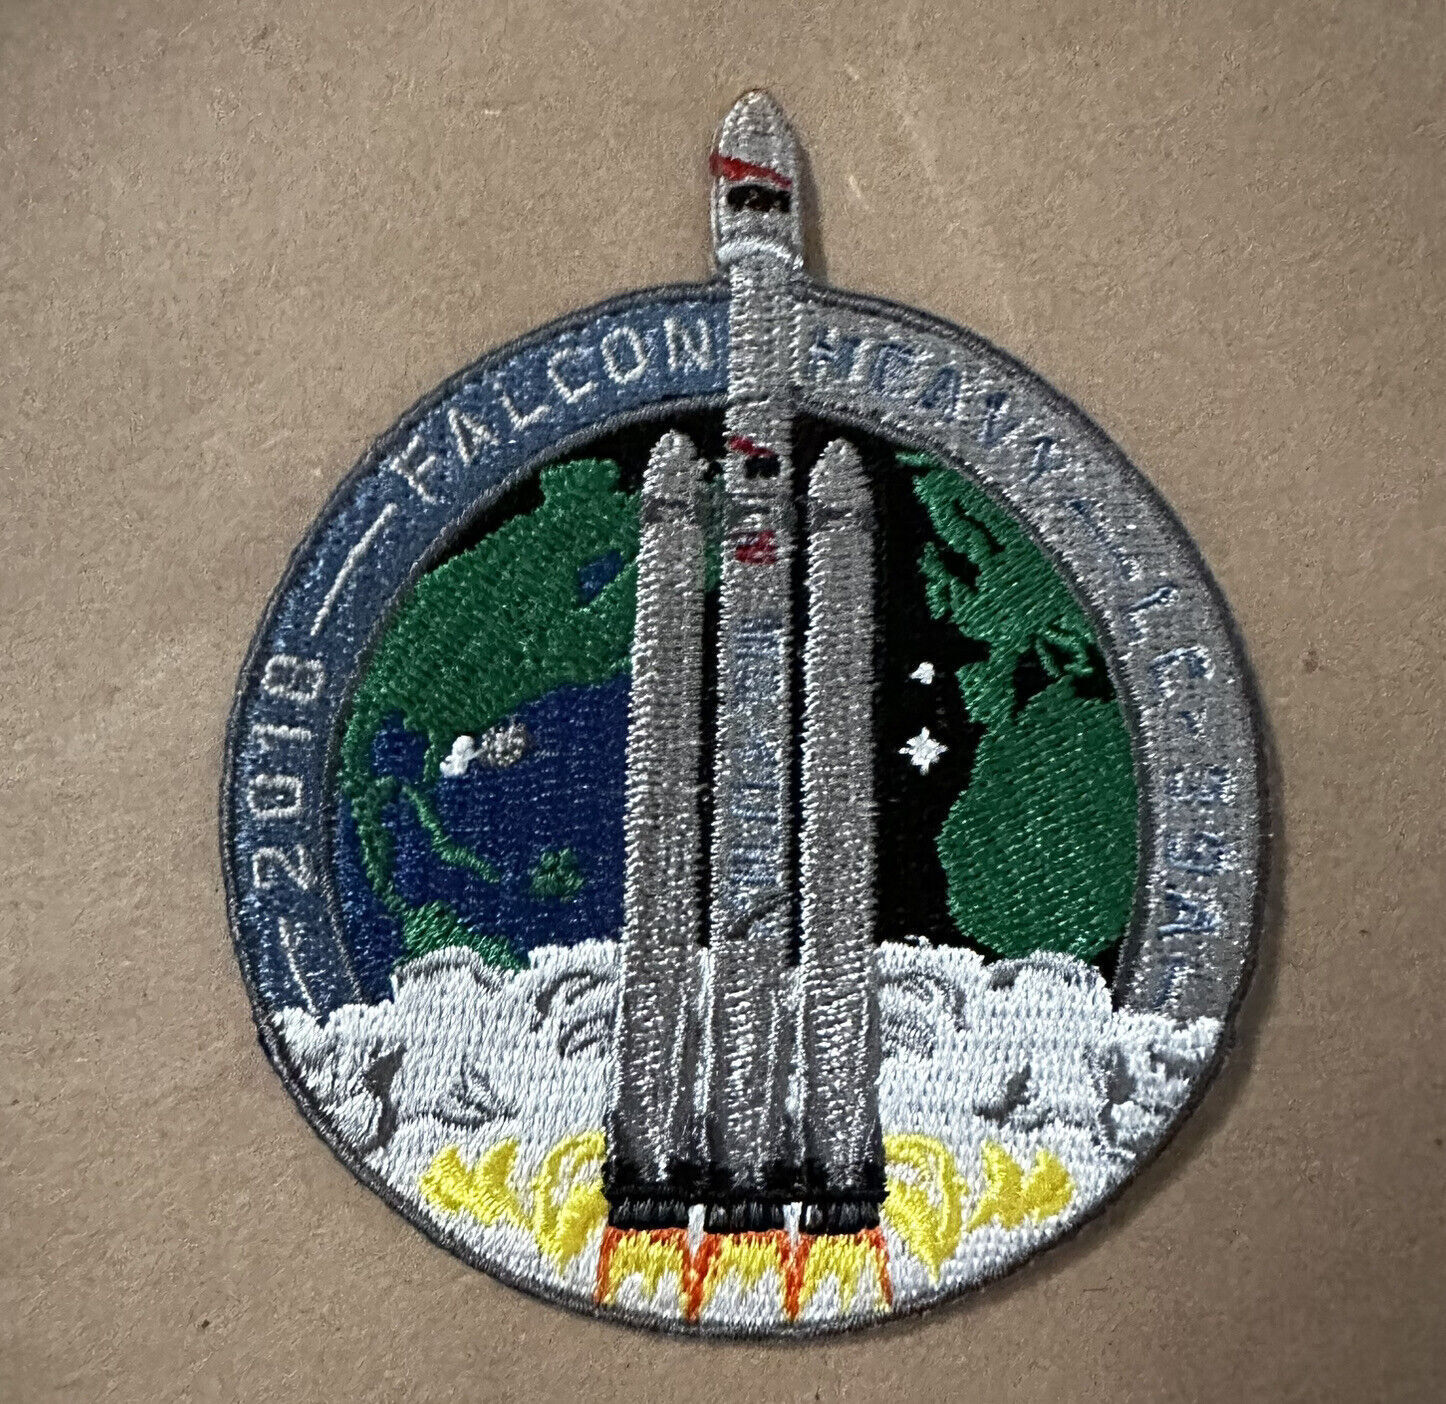 Original SpaceX FALCON HEAVY 2018 First Launch Mission Patch NASA Falcon 9 3”